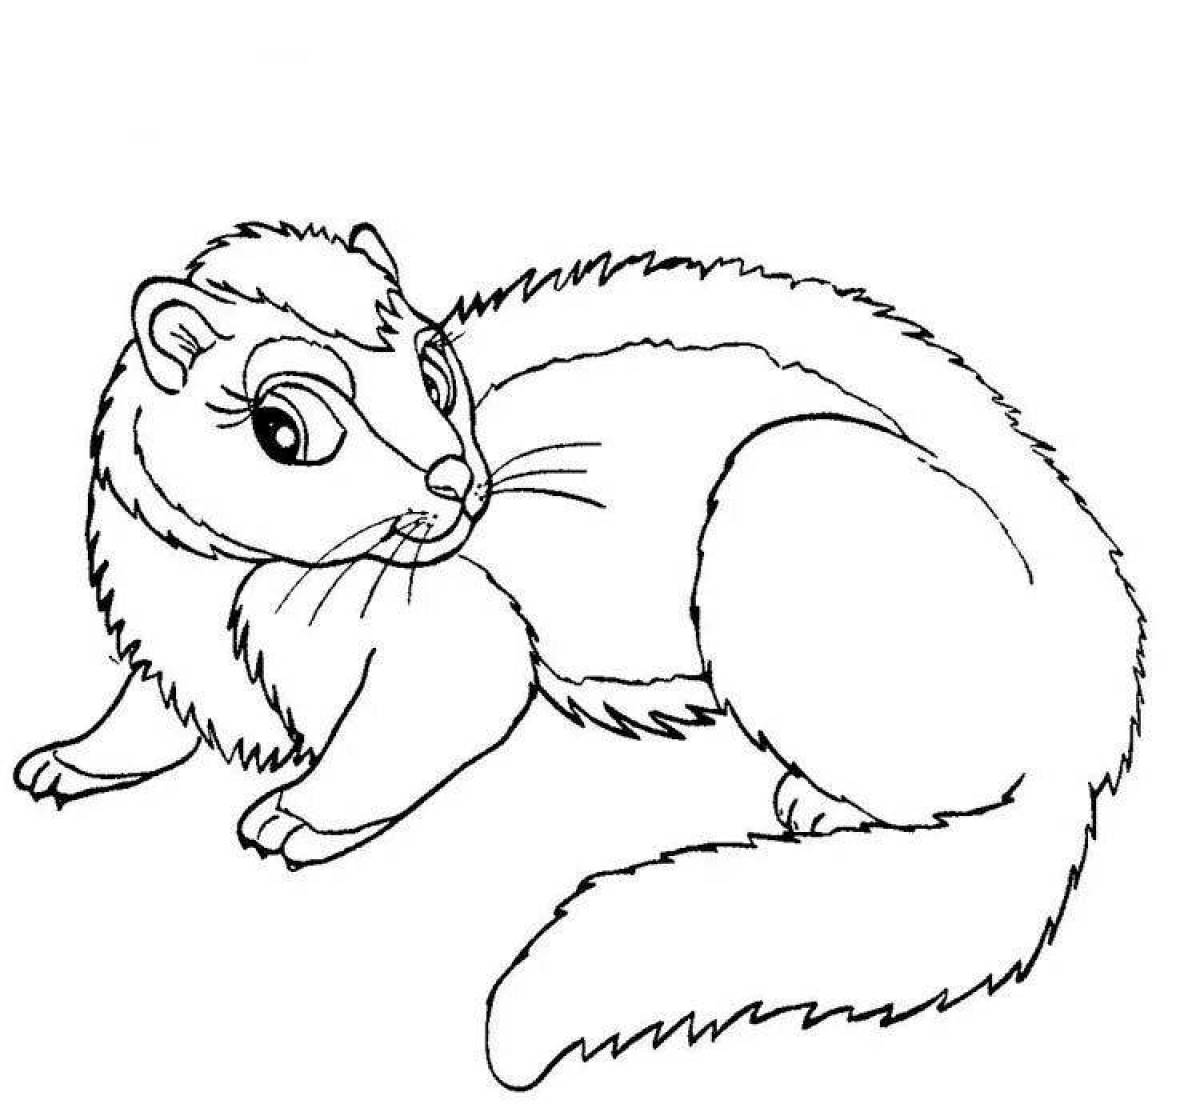 Fancy weasel animal coloring page